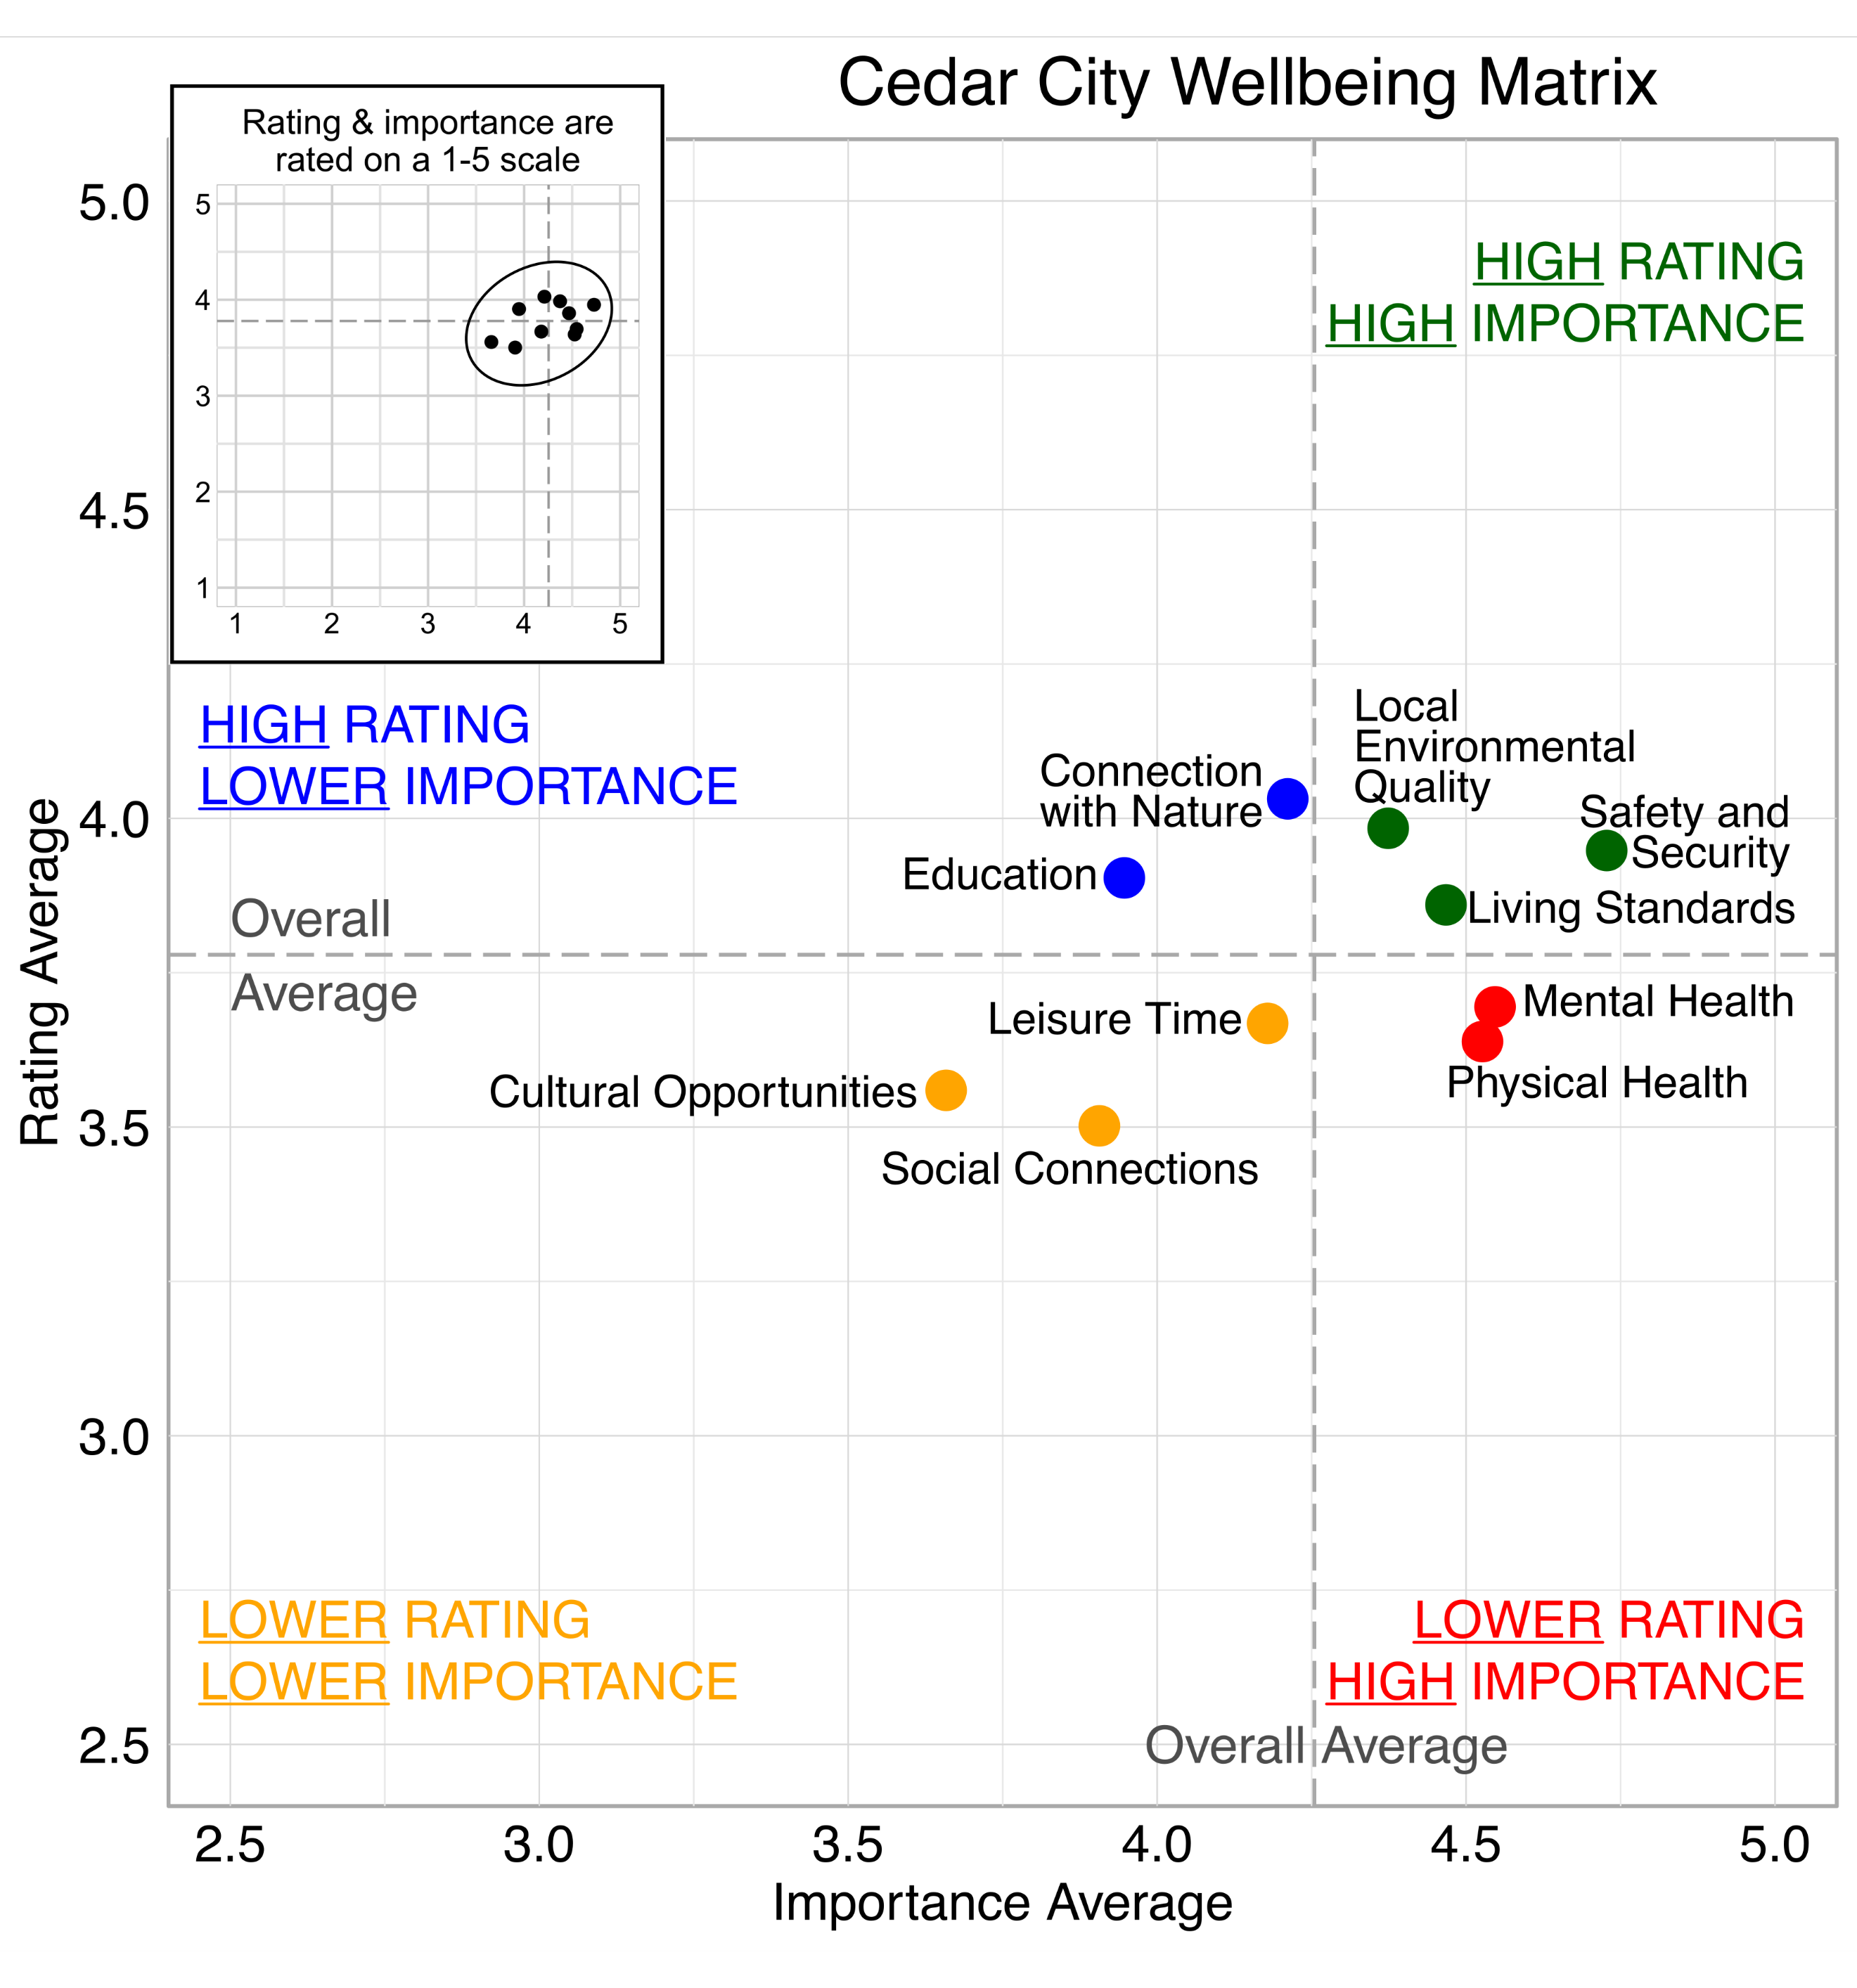 Scatterplot. Title: Cedar City Wellbeing Matrix. Domains are classified into four quadrants depending on their average rating and average importance as compared to the average of all the average domain ratings and the average of all the average domain importance ratings. High rating, high importance (green quadrant) domains include: Safety and Security, Living Standards, and Local Environmental Quality. High rating, lower Importance (blue quadrant) domains include: Education and Connection with Nature. Lower rating, lower importance (yellow quadrant) domains include: Social Connections, Leisure Time, and Cultural Opportunities. Lower rating, high importance (red quadrant) domains include: Mental Health and Physical Health.